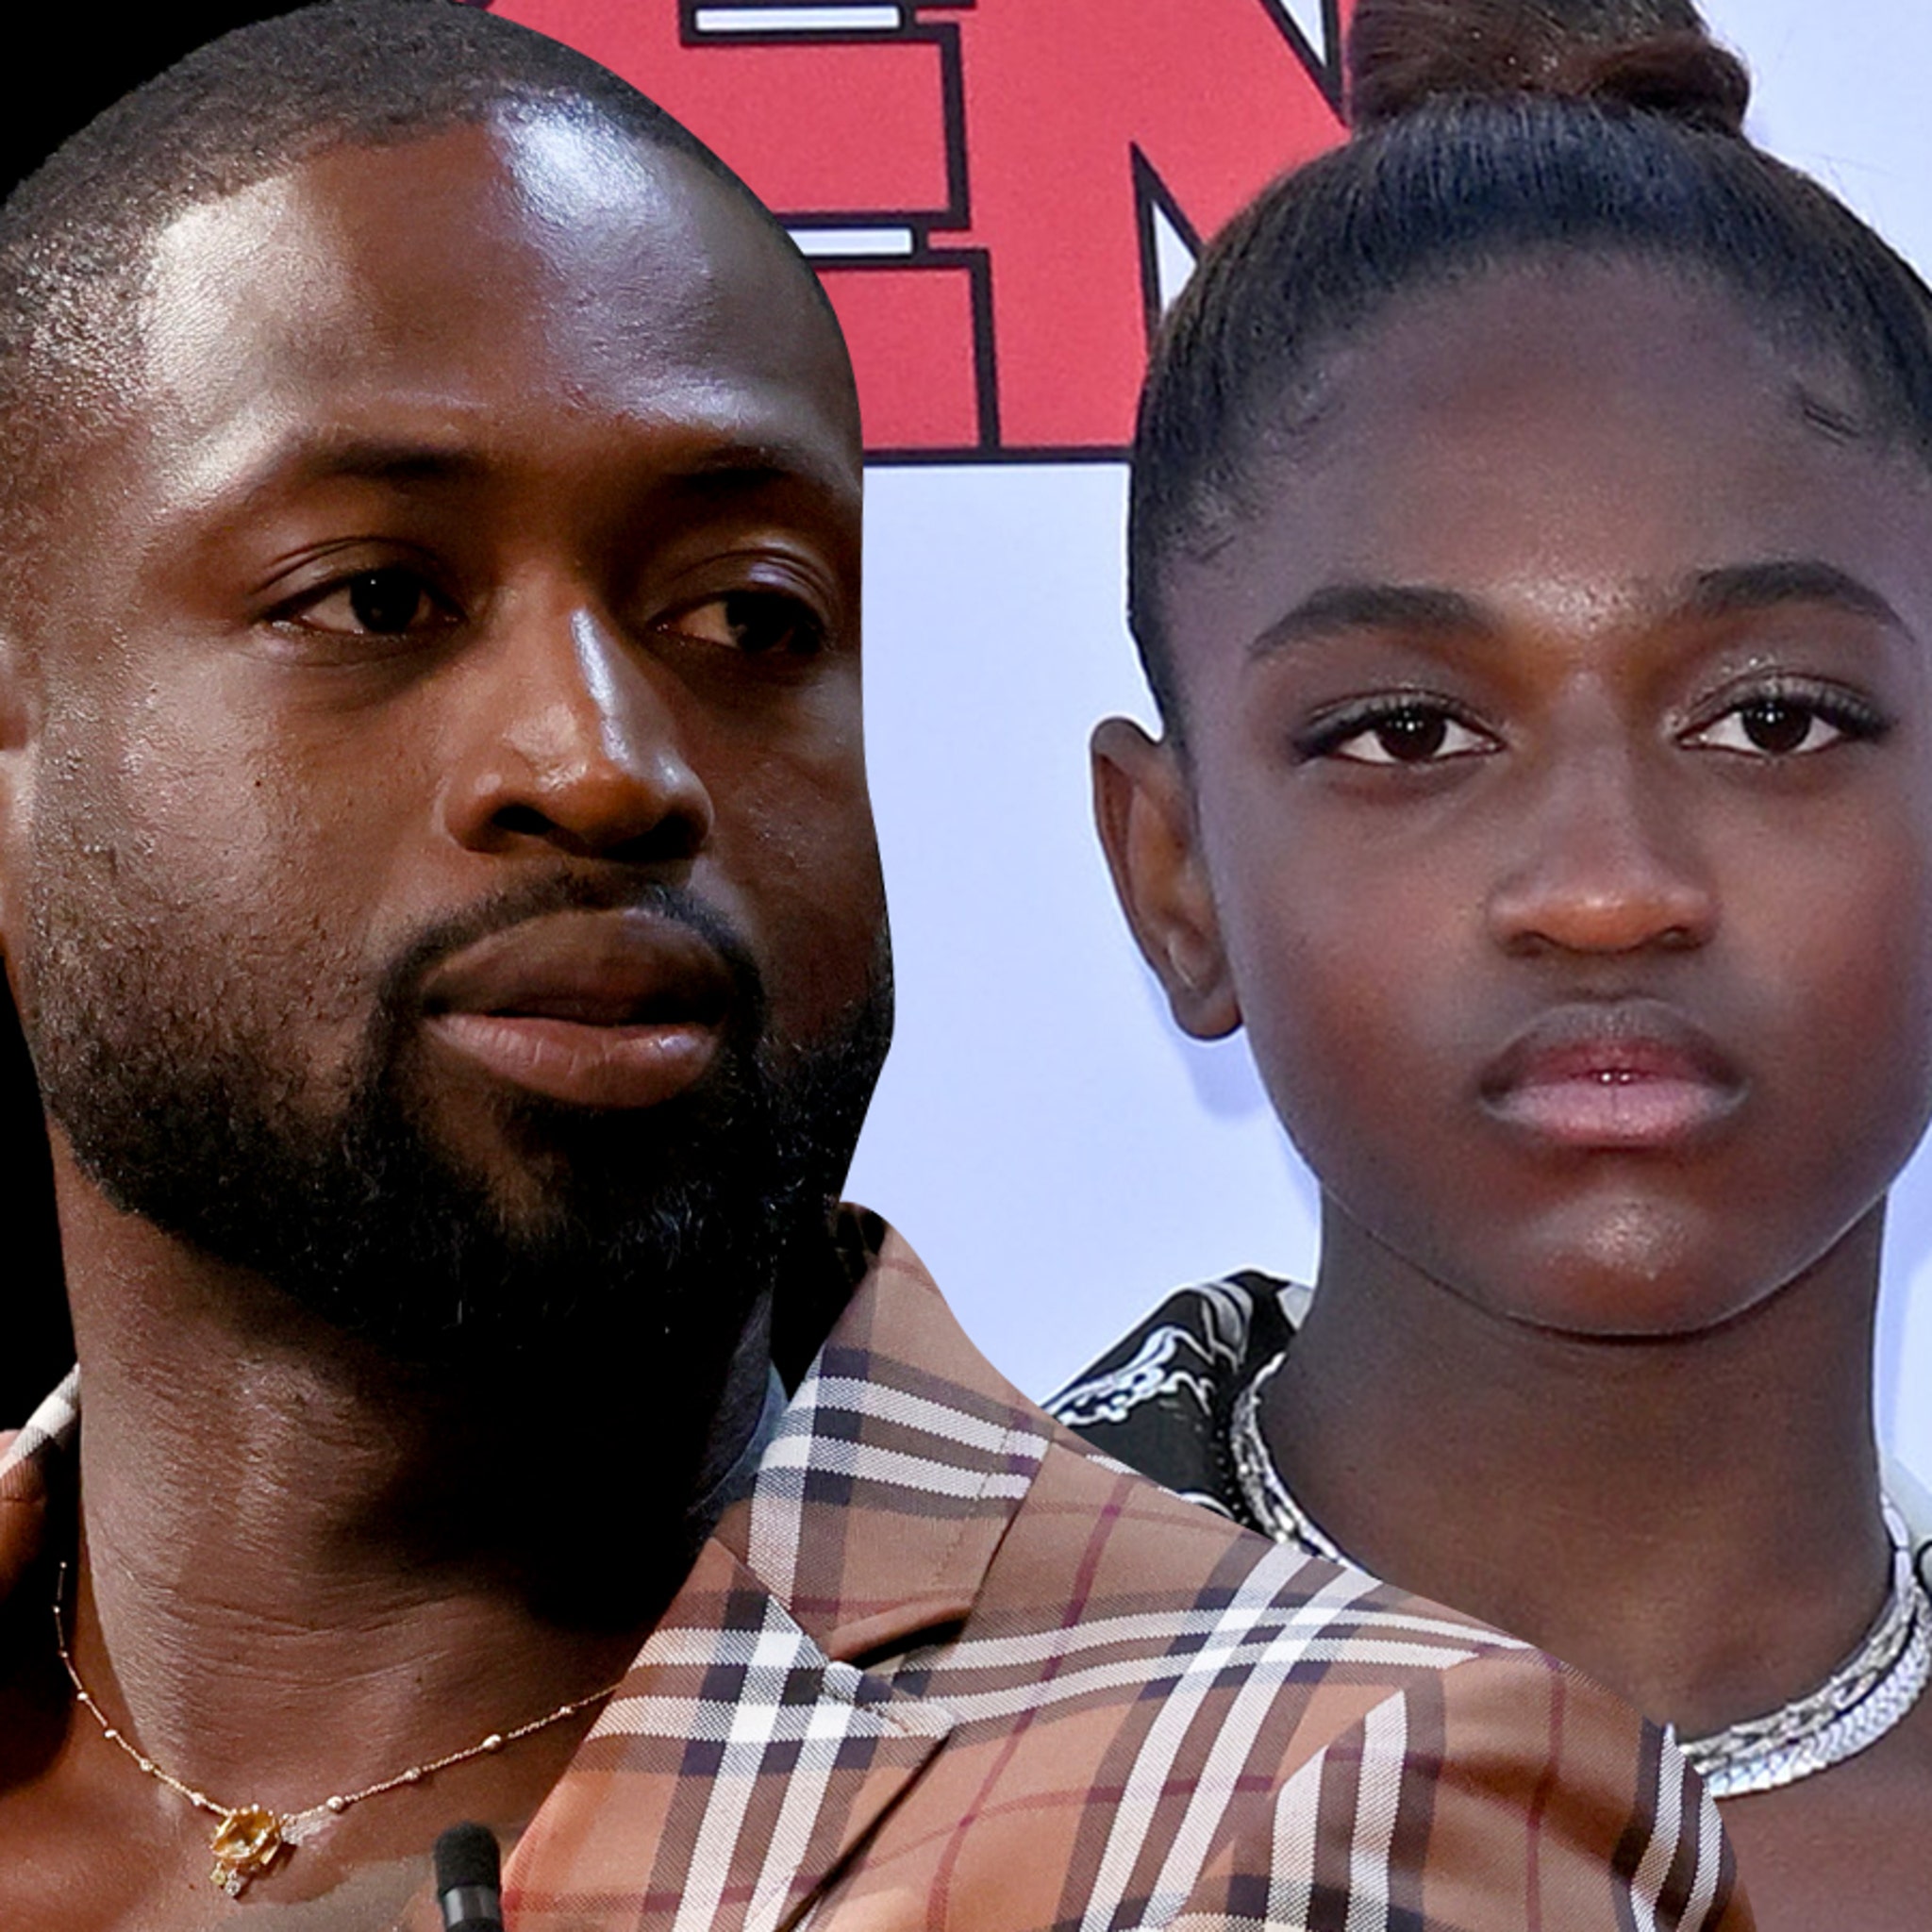 Ruthless New York Knicks fans go after Dwyane Wade's trans child in Heat's  NYC visit